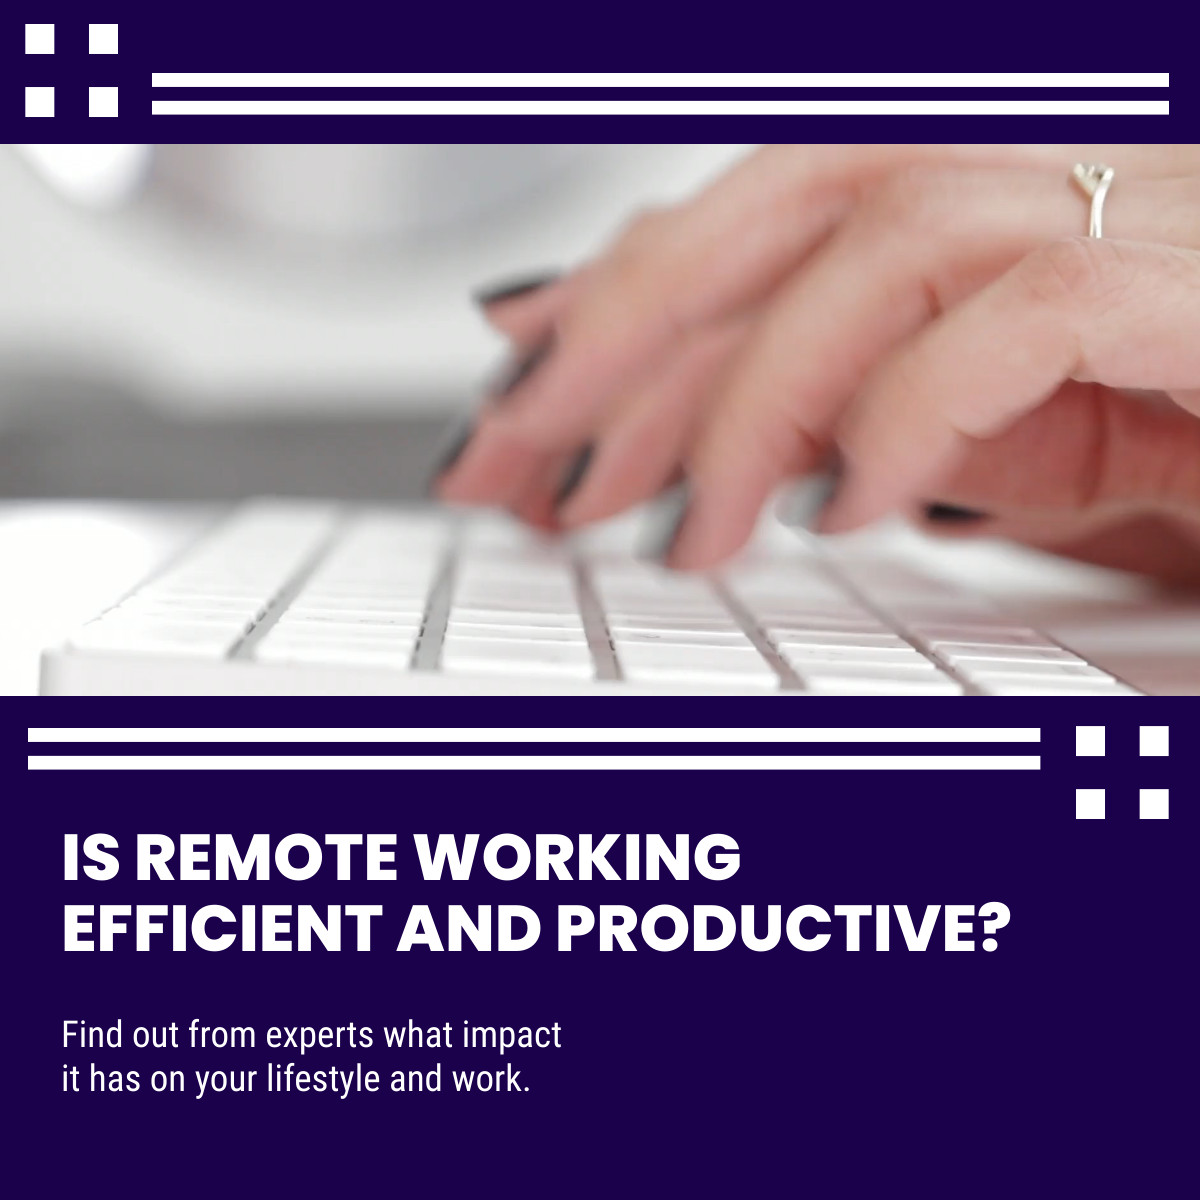 Efficient and Productive Remote Working Video Facebook Video Cover 1250x463